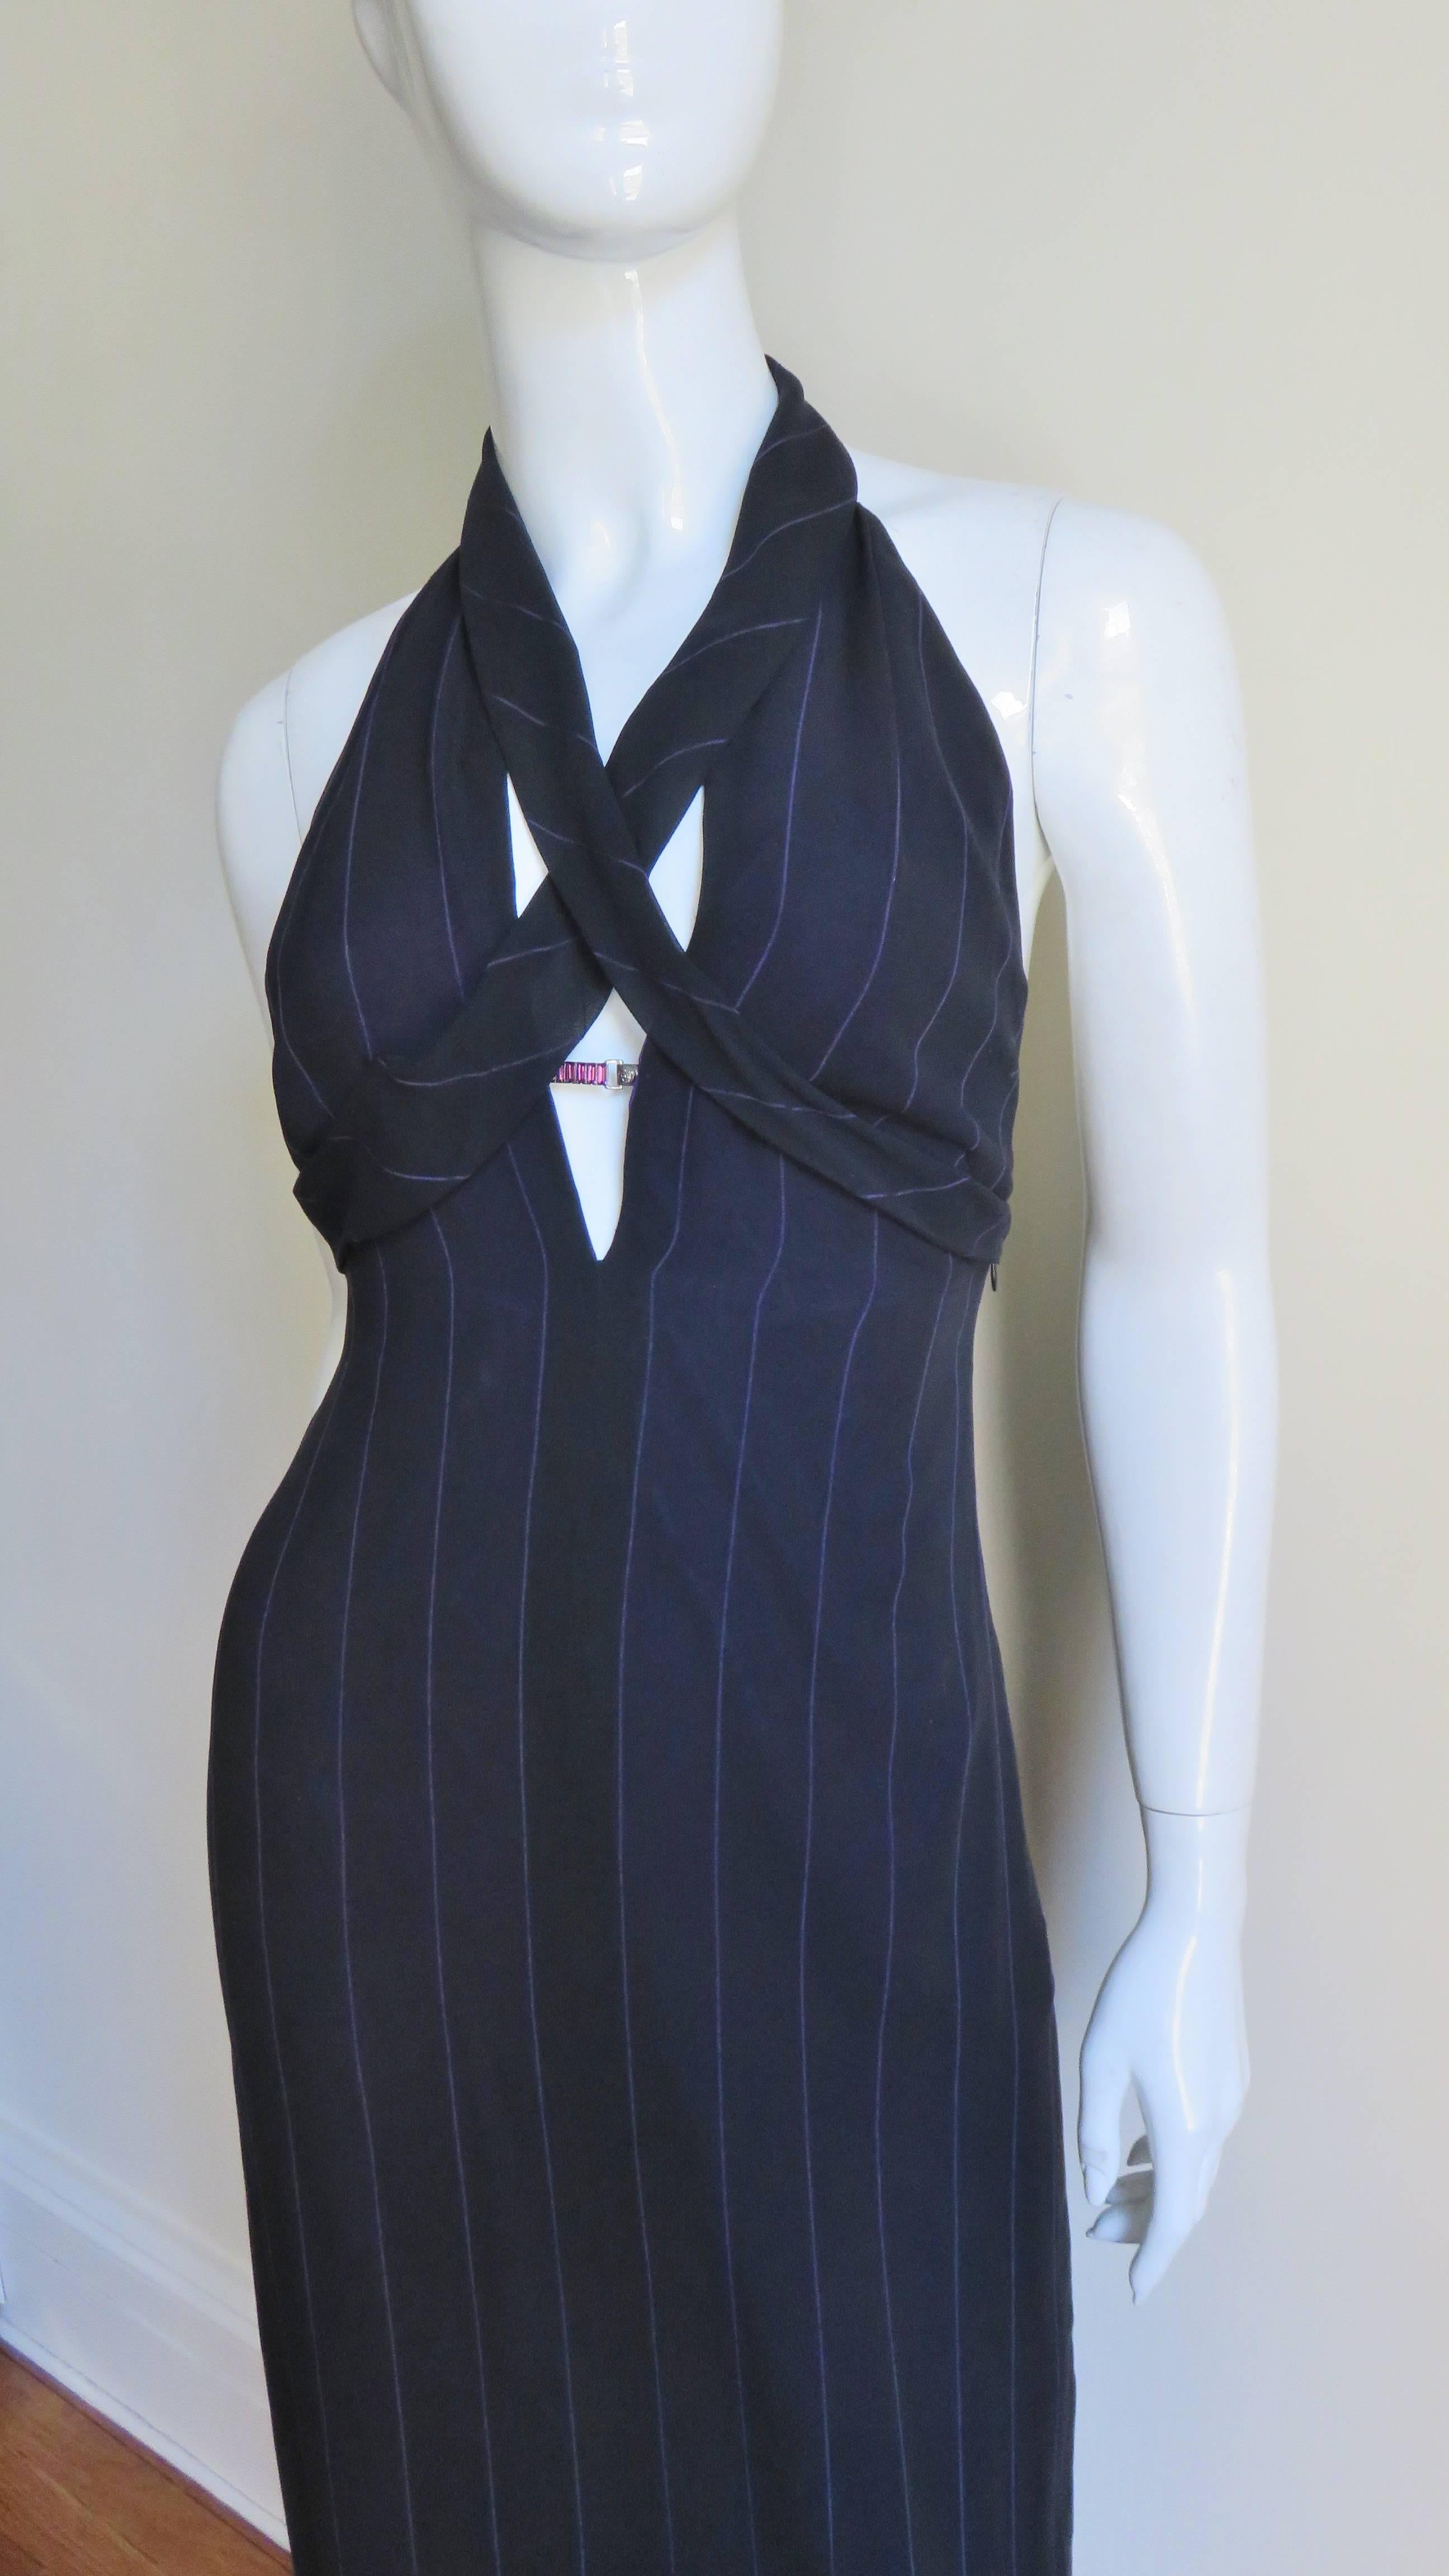 A fabulous black with fine purple pin stripes silk dress from Gianni Versace.  It has a plunging halter neckline with 2 bands of fabric crossing the chest and has a fine silver metal bar with a purple stone located mid cleavage joining the two